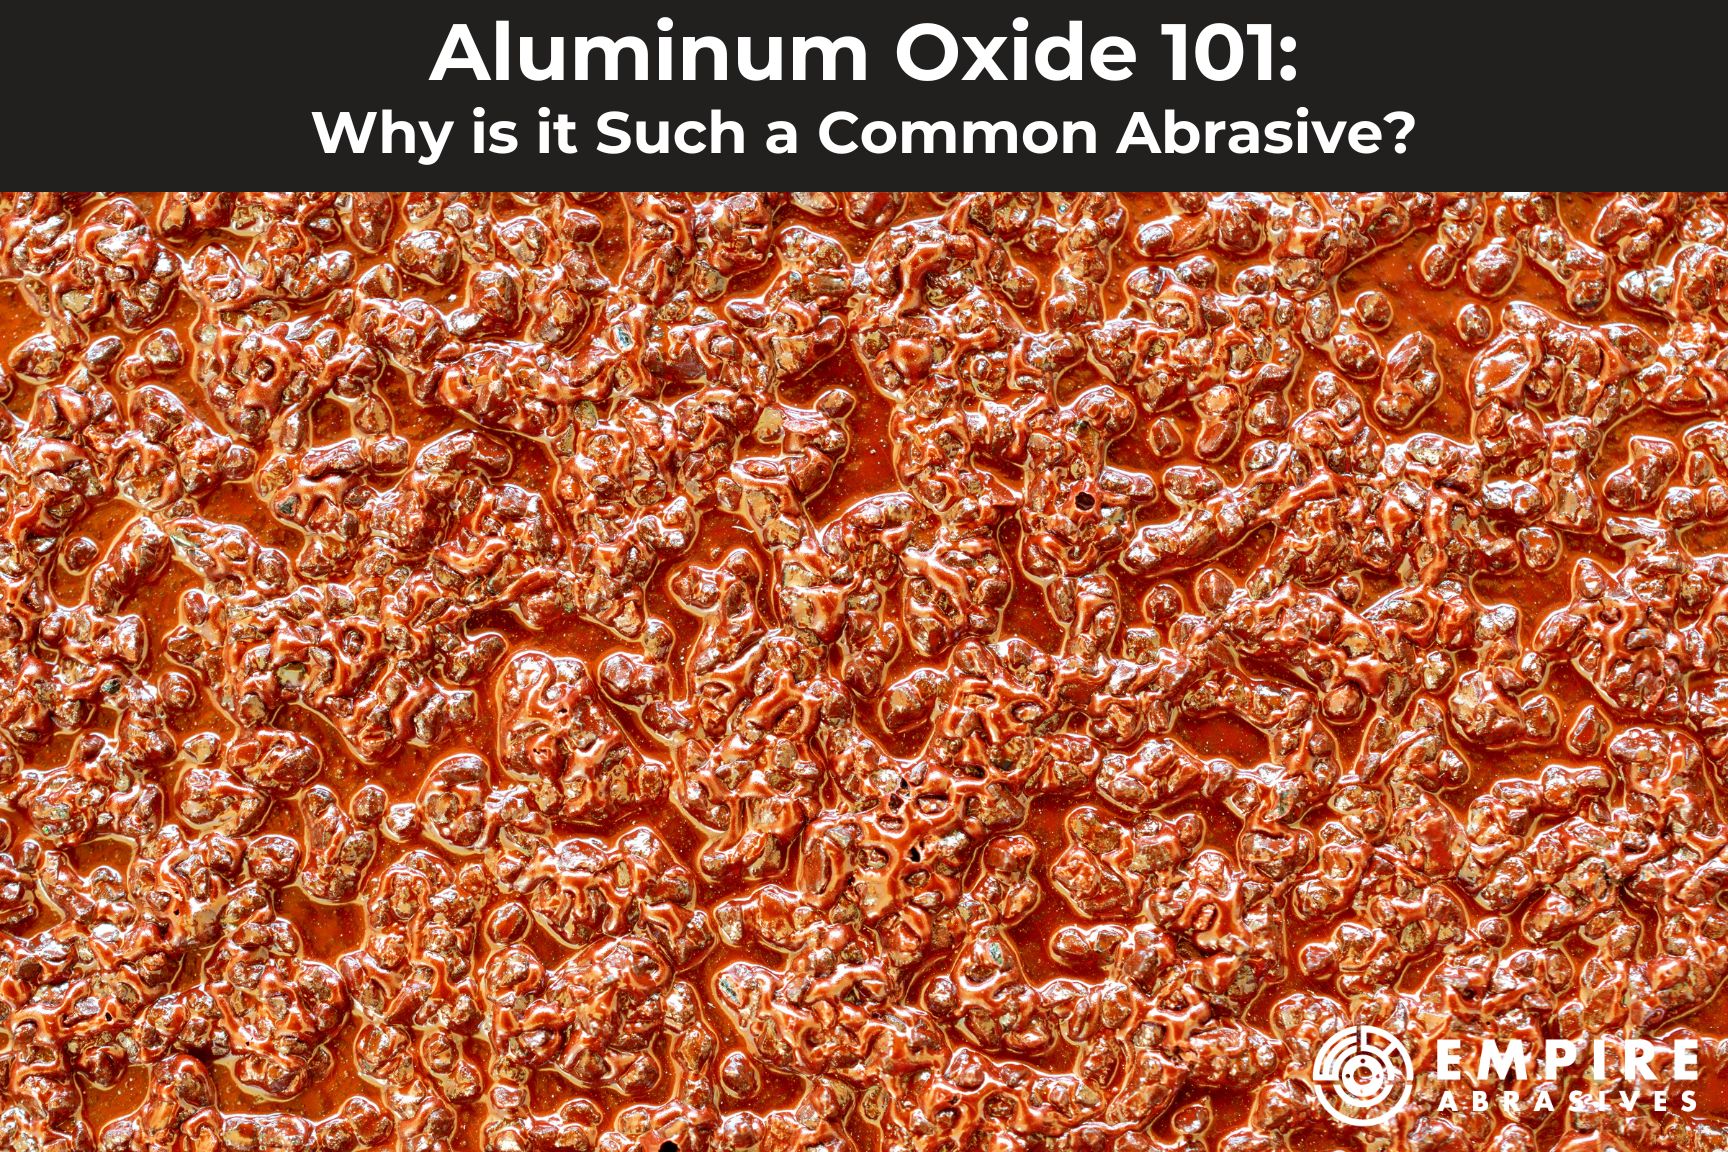 Blog post header for "Aluminum Oxide 101:Why is it Such a Common Abrasive?" by Empire Abrasives featuring a close up image of aluminum oxide grains.